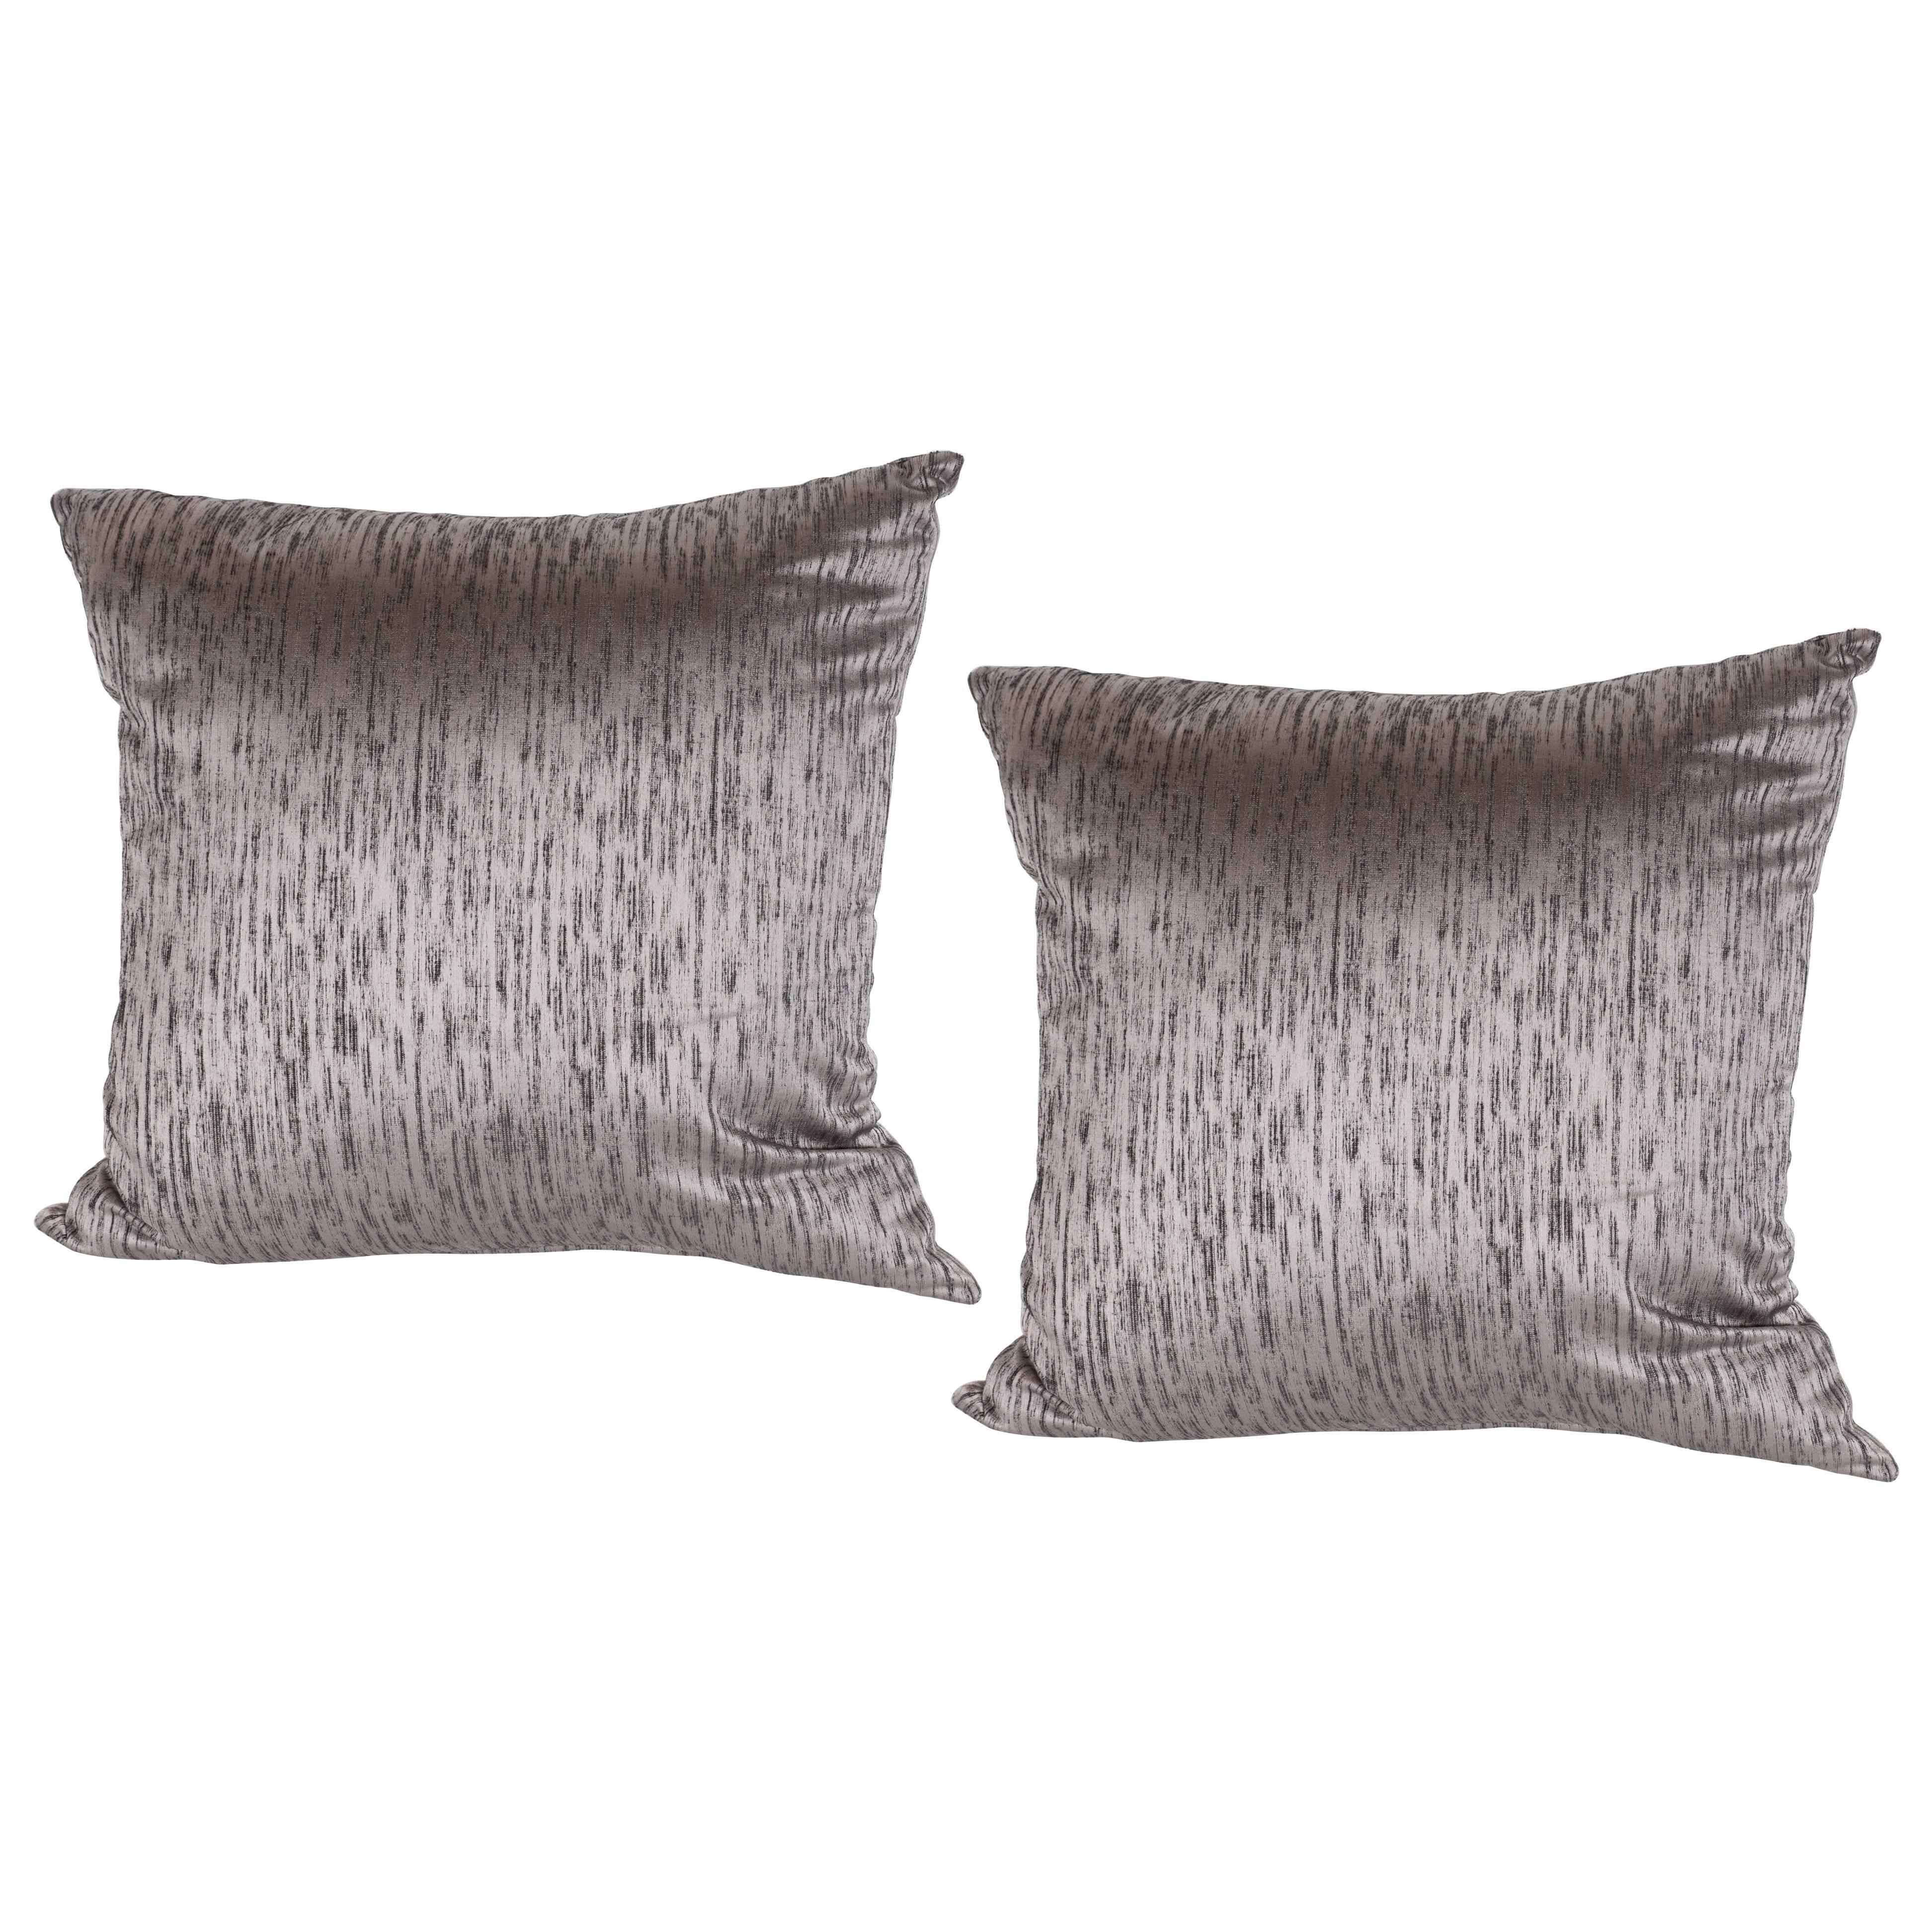 Pair of Modernist Pillows in Iridescent Lavender with Organic Black Patternation